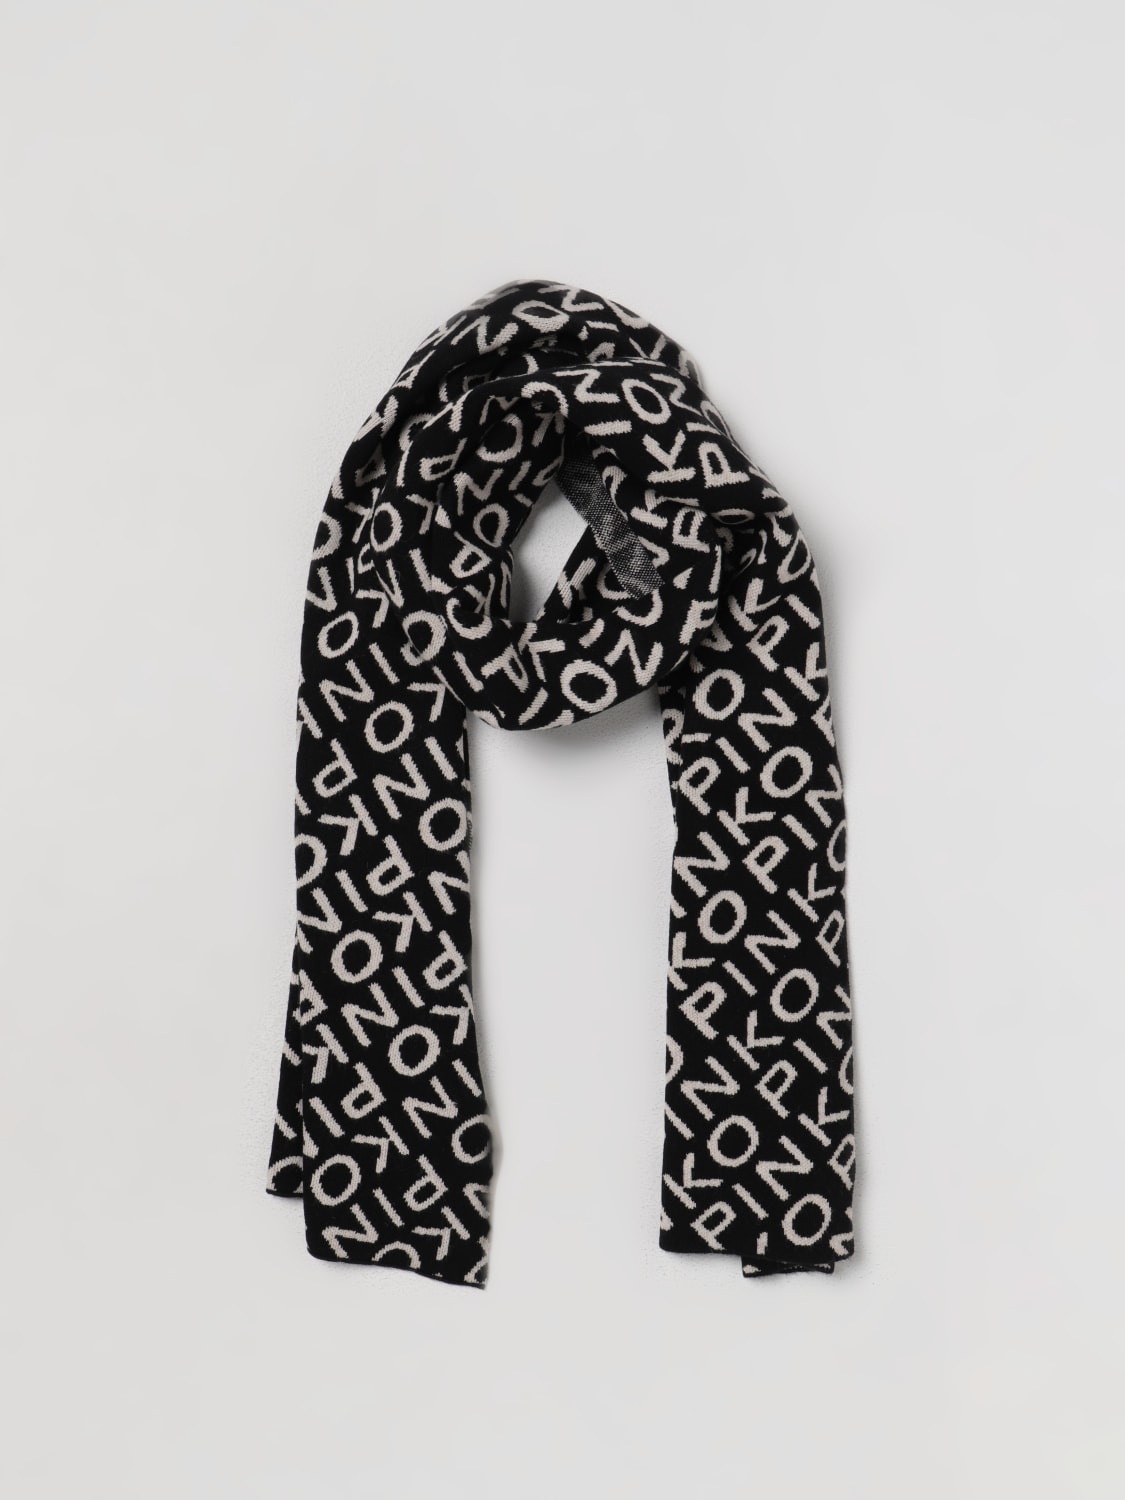 Lv black and white checkered scarf